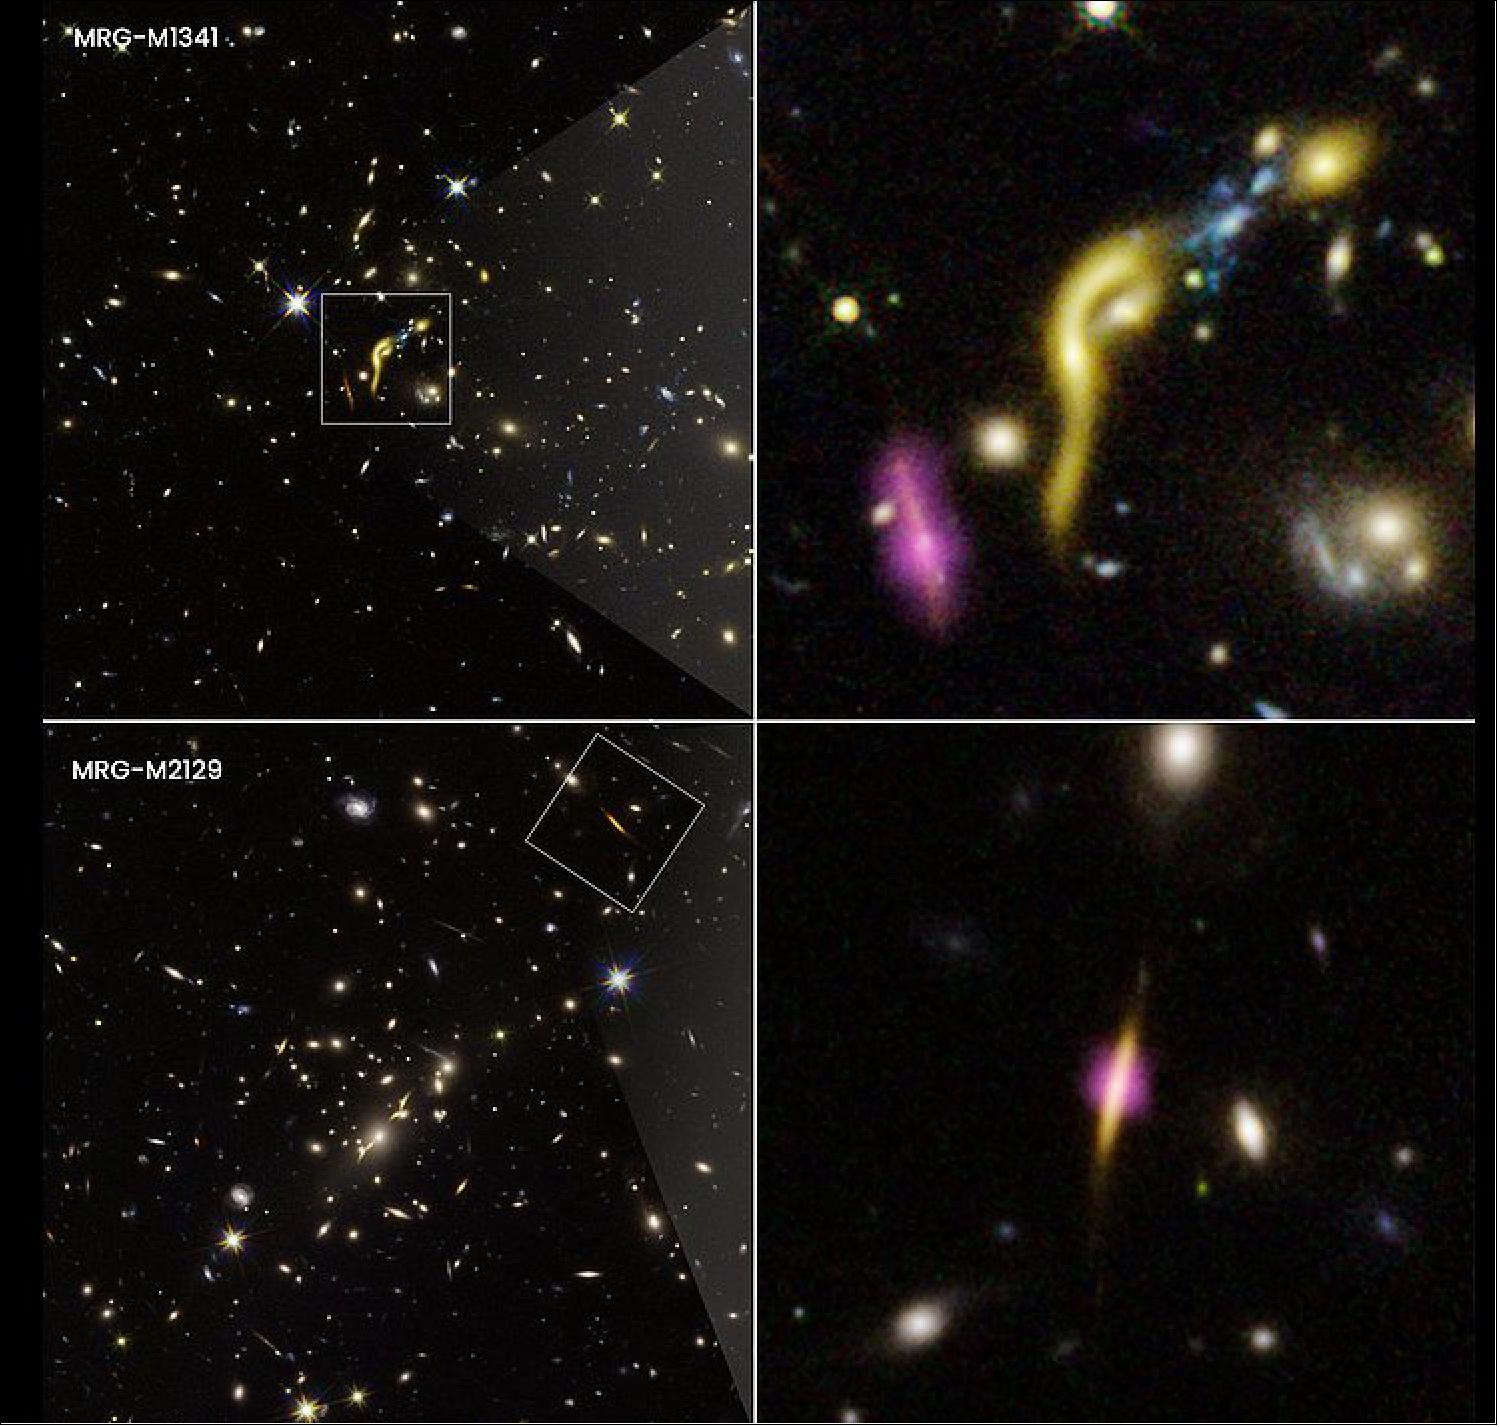 Figure 47: These images are composites from NASA's Hubble Space Telescope and the Atacama Large Millimeter/submillimeter Array (ALMA). The boxed and pullout images show two of the six, distant, massive galaxies where scientists found star formation has ceased due to the depletion of a fuel source—cold hydrogen gas. Hubble, together with ALMA, found these odd galaxies when they combined forces with the "natural lens" in space created by foreground massive galaxy clusters. The clusters' gravity stretches and amplifies the light of the background galaxies in an effect called gravitational lensing. This phenomenon allows astronomers to use massive galaxy clusters as natural magnifying glasses to study details in the distant galaxies that would otherwise be impossible to see. - The yellow traces the glow of starlight. The artificial purple color traces cold dust from ALMA observations. This cold dust is used as a proxy for the cold hydrogen gas needed for star formation. - Even with ALMA's sensitivity, scientists do not detect dust in most of the six galaxies sampled. One example is MRG-M1341, at upper right. It looks distorted by the "funhouse mirror" optical effects of lensing. In contrast, the purple blob to the left of the galaxy is an example of a dust-and-gas-rich galaxy. - One example of the detection of cold dust ALMA did make is galaxy MRG-M2129 at bottom right. The galaxy only has dust and gas in the very center. This suggests that star formation may have shut down from the outskirts inward [image credit: Lead Author: NASA, ESA, Katherine E. Whitaker (UMass); Image Processing: Joseph DePasquale (STScI)]